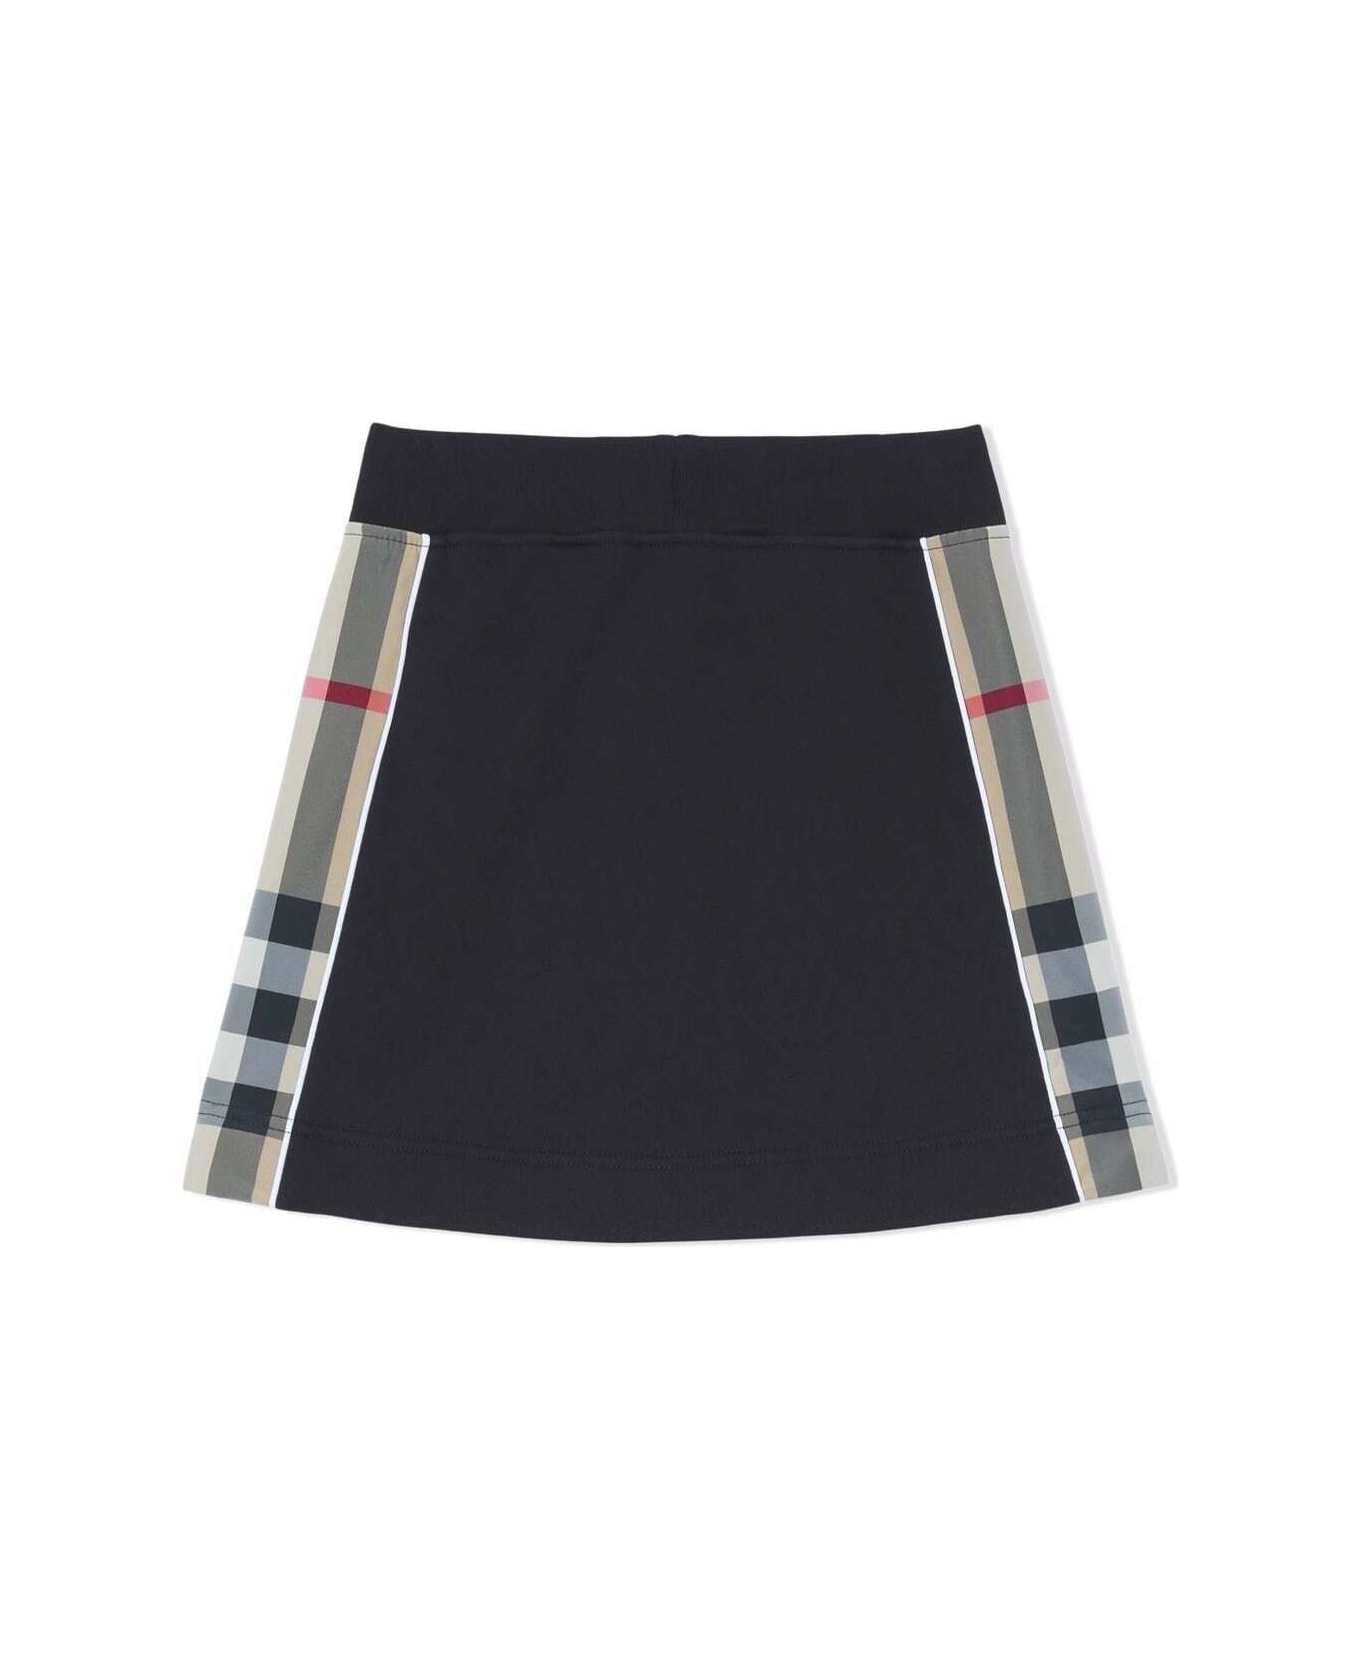 Burberry Black Cotton Skirt With Vintage Check Inserts - Black